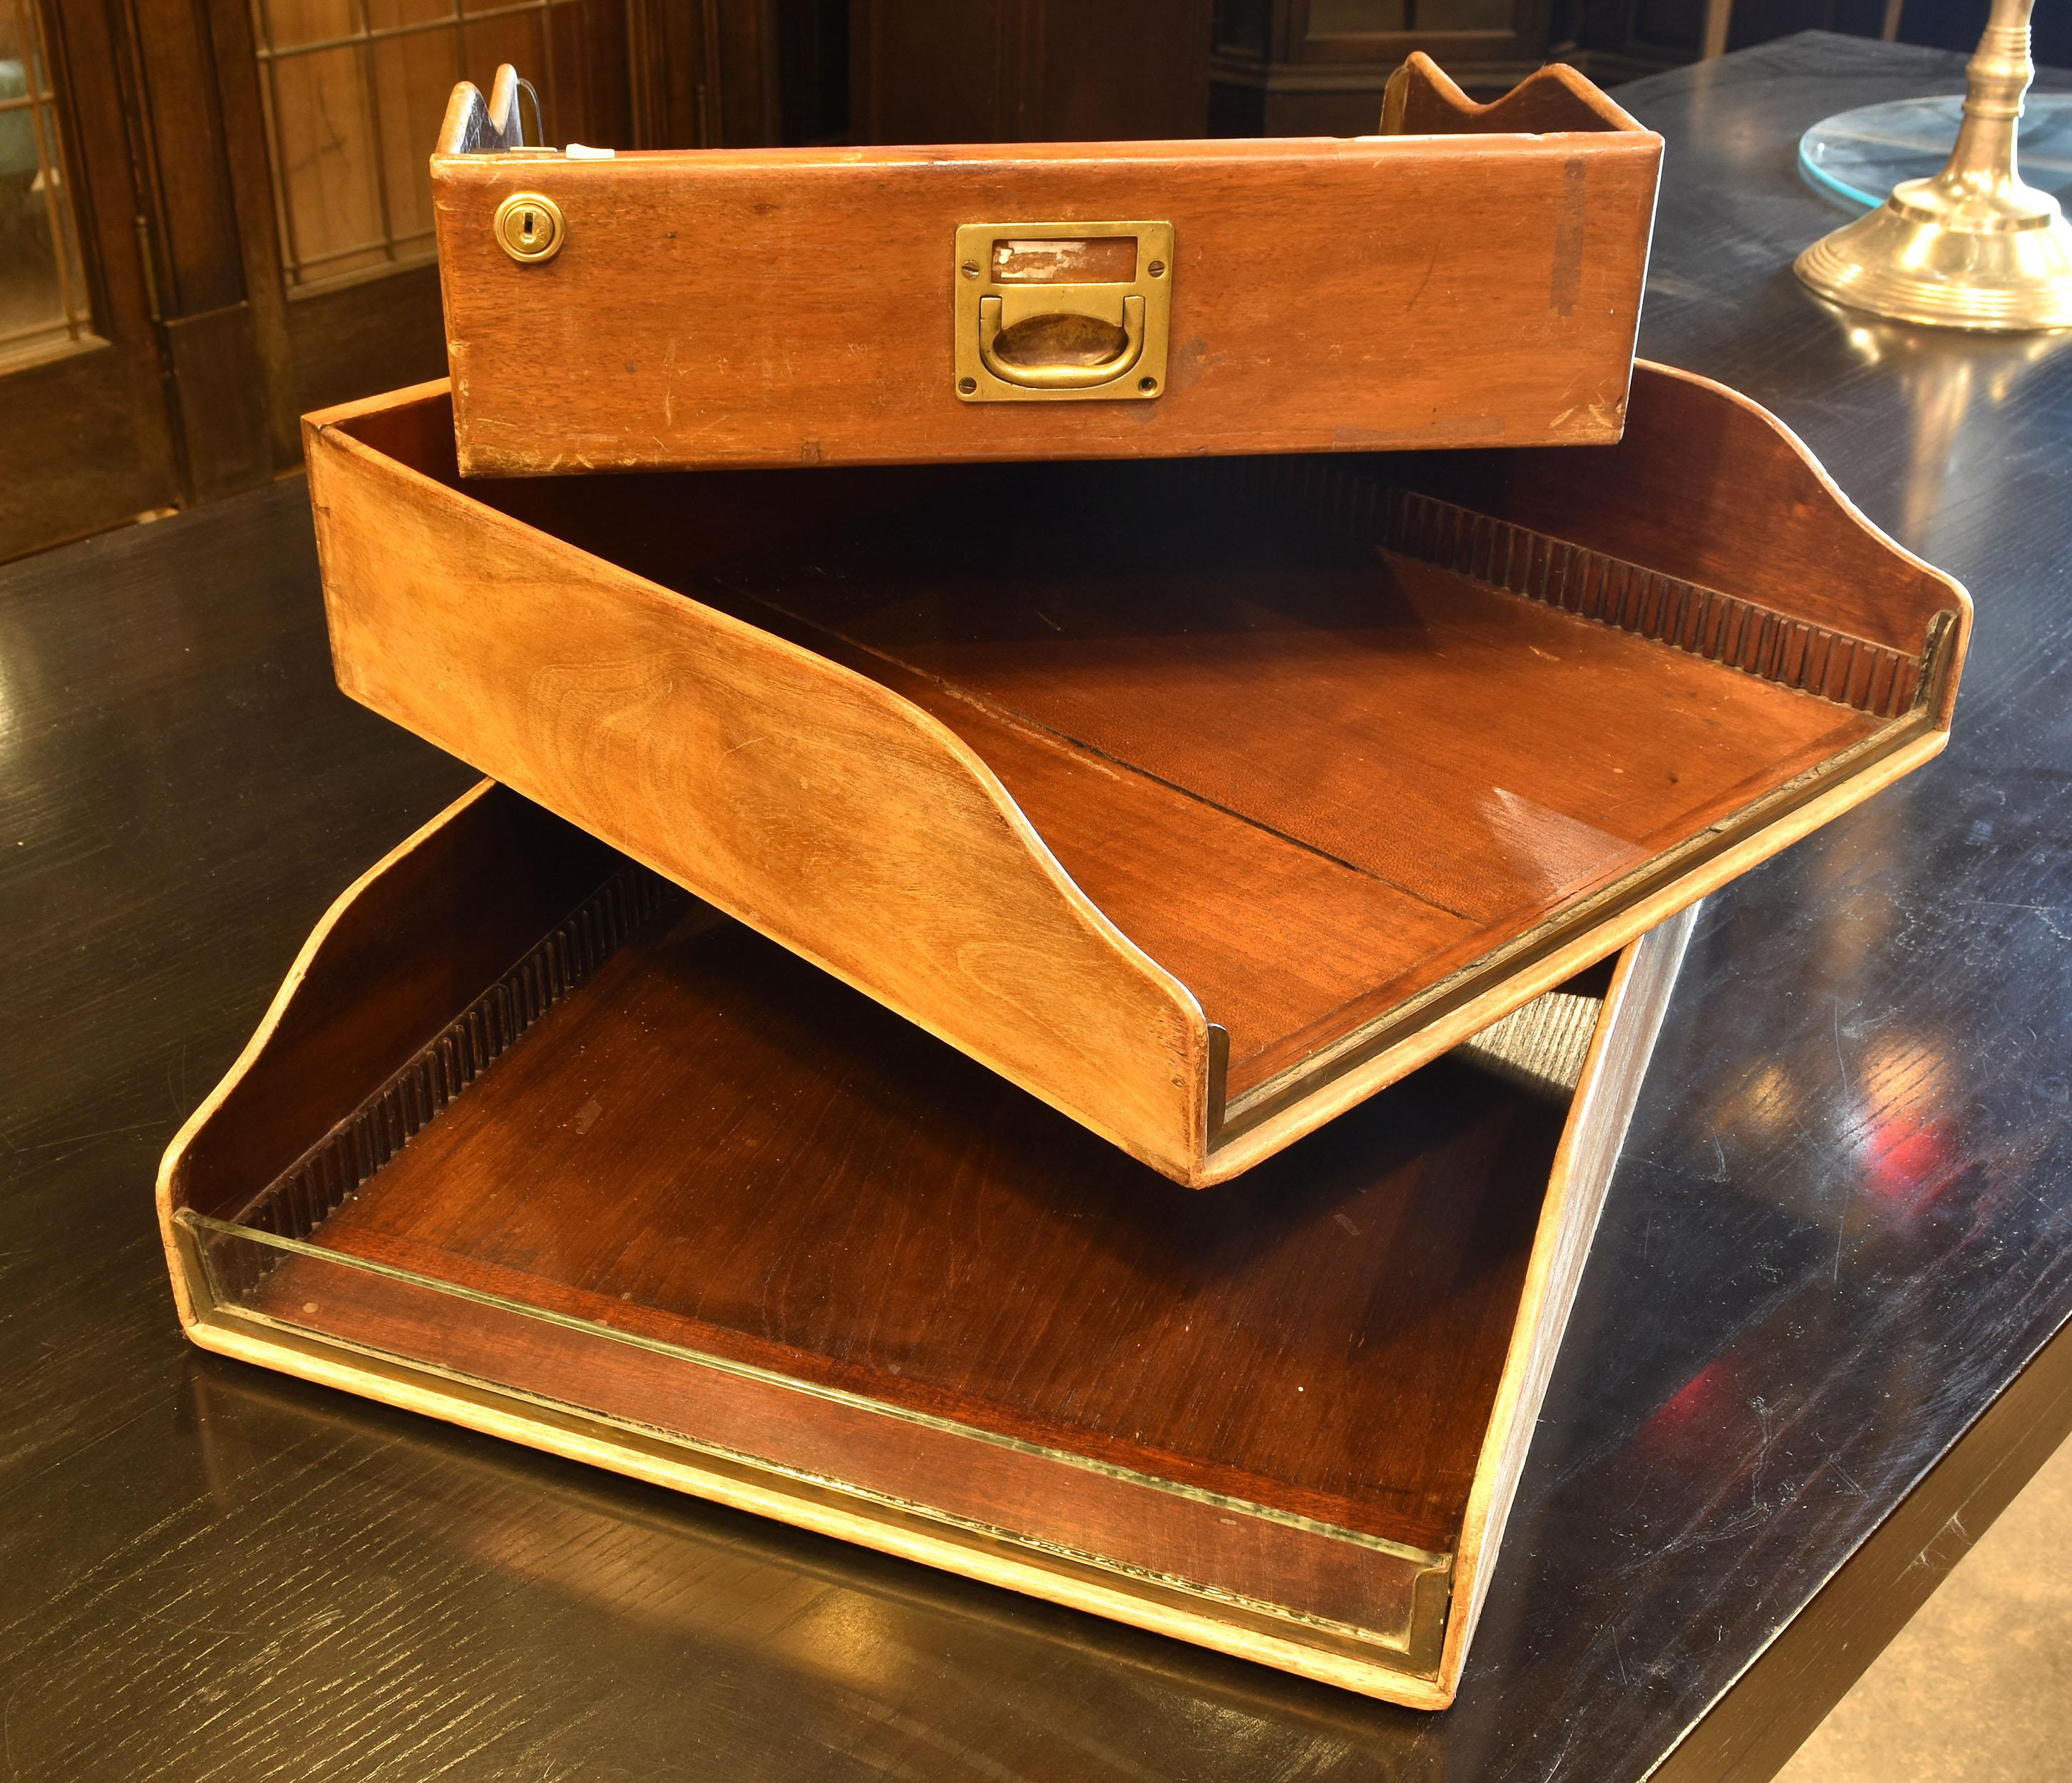 North American Deco Inlaid Mercantile Display Case with Shelves